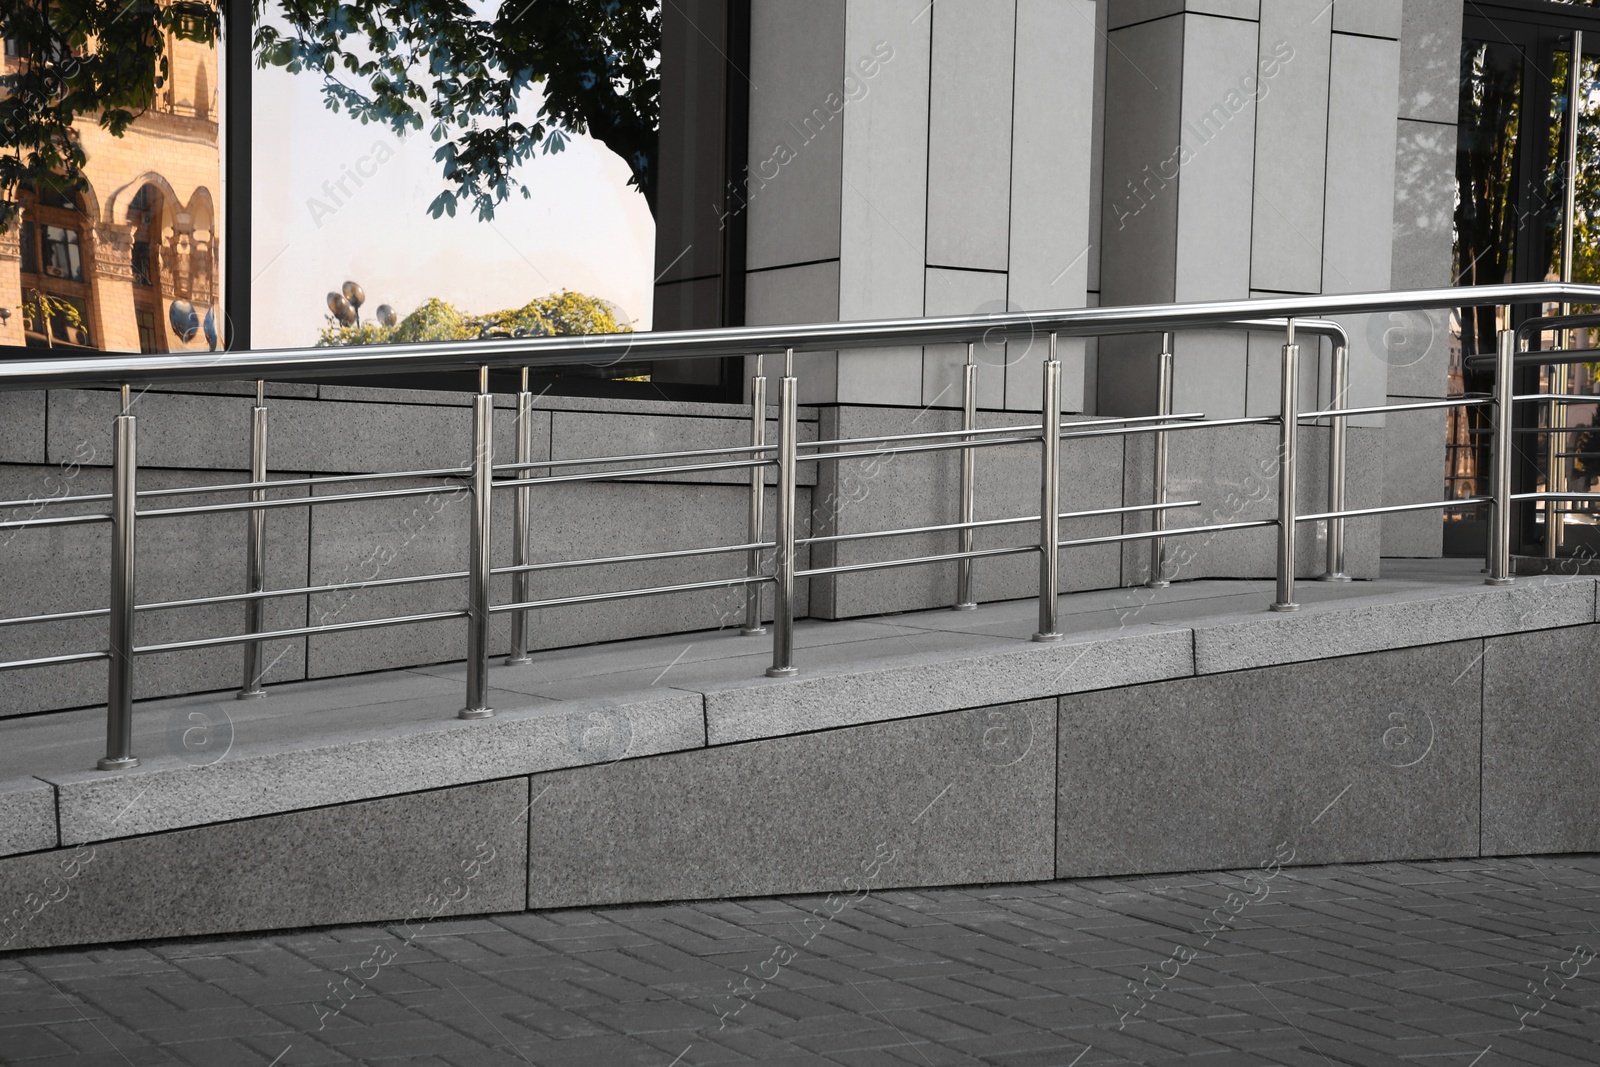 Photo of Ramp with metal handrails near building outdoors